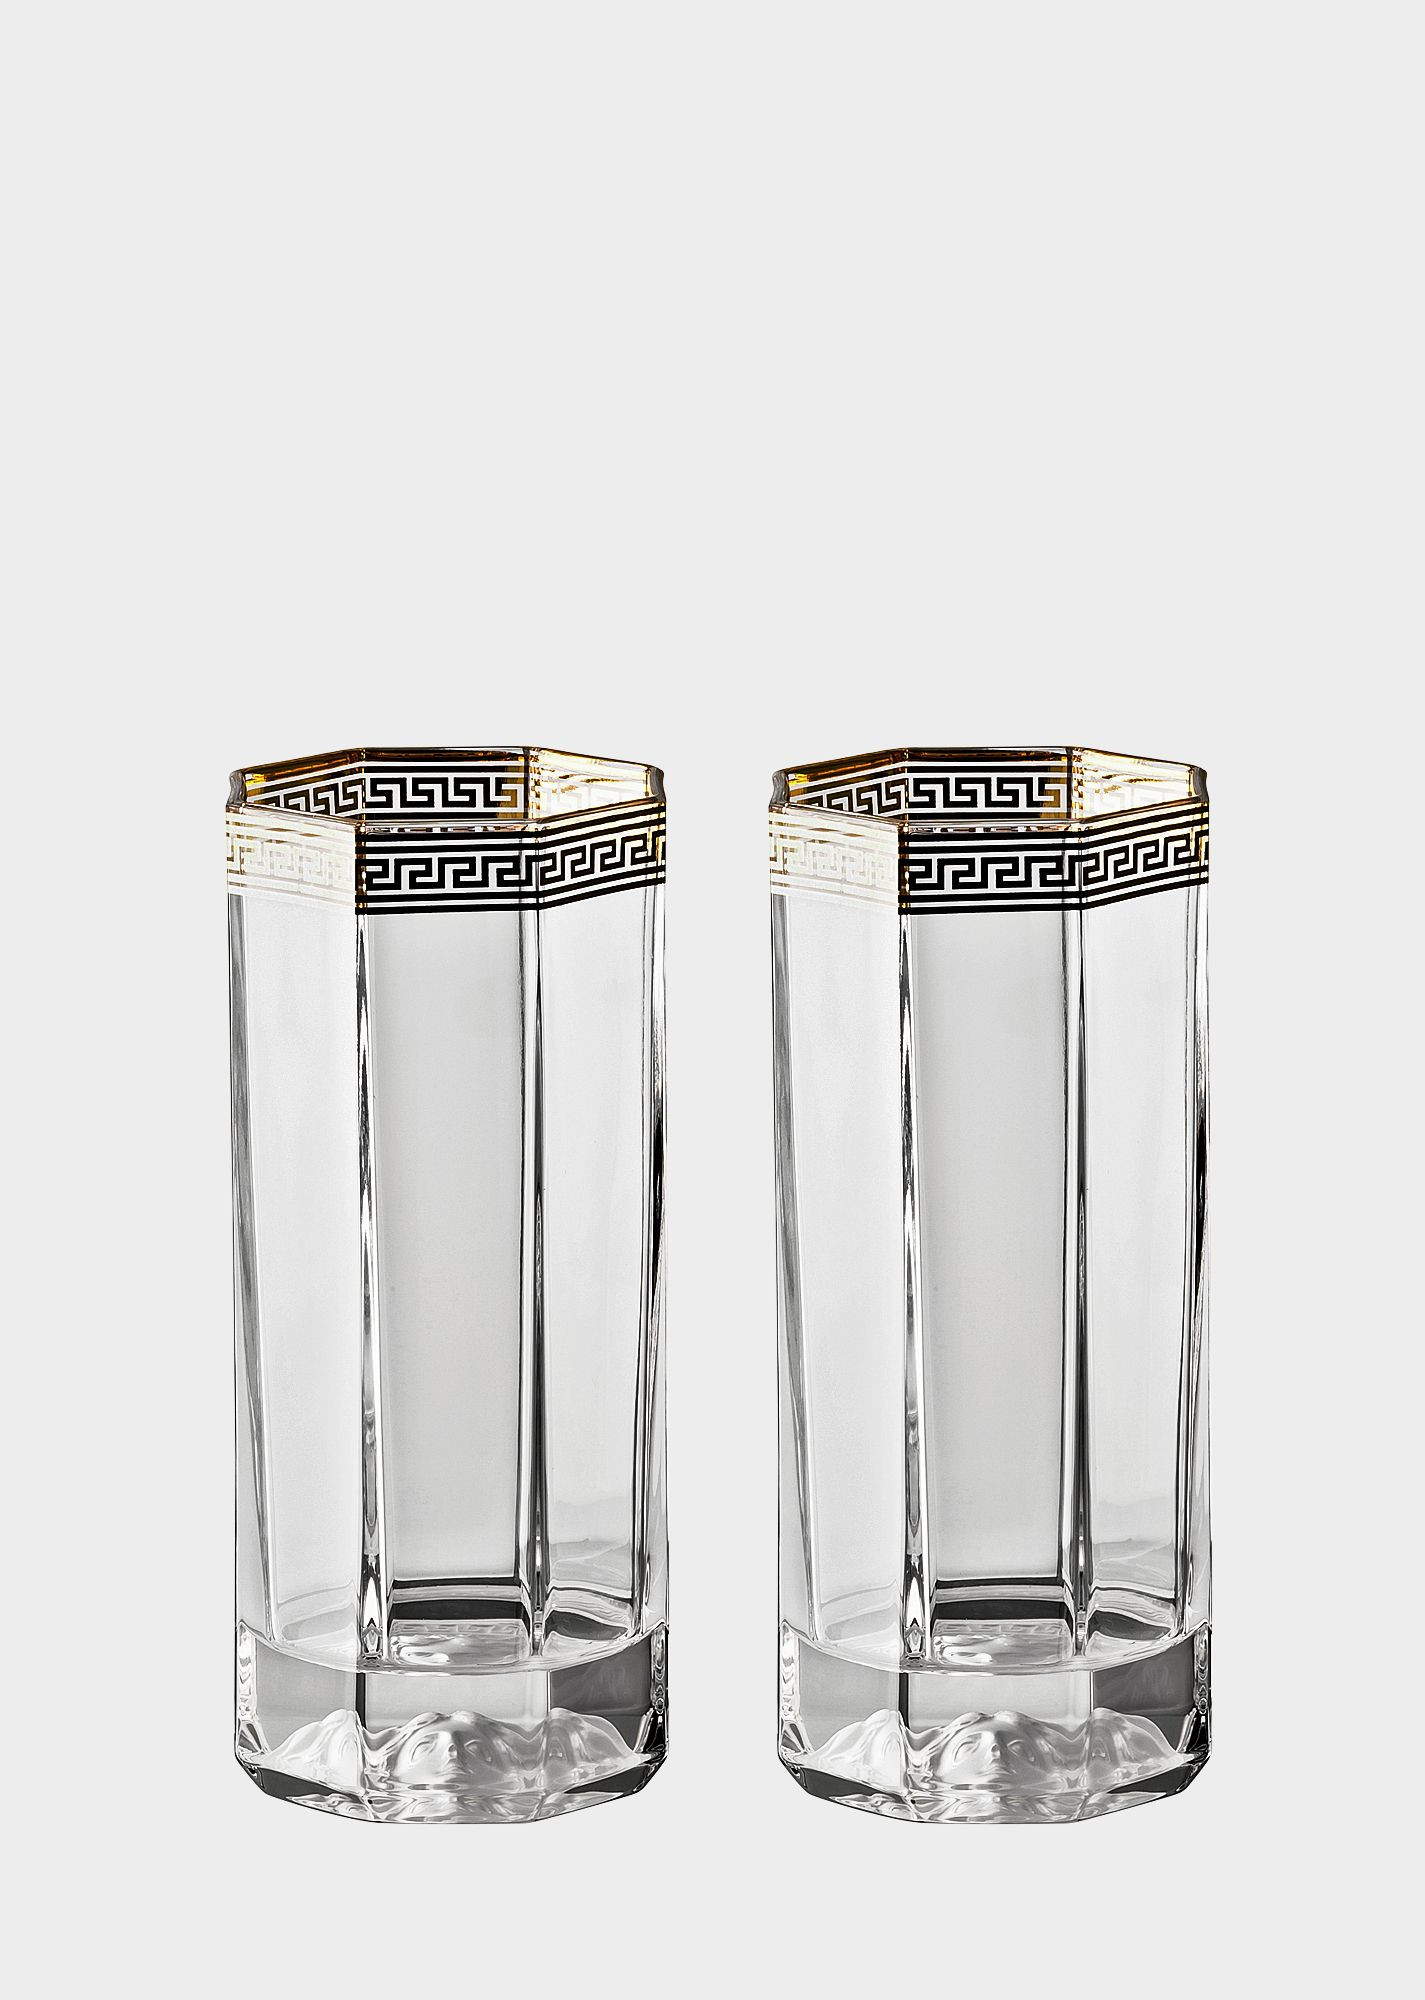 22 Cute Champagne Glasses In Vase 2024 free download champagne glasses in vase of 21 crystal glass vase the weekly world for versace home luxury glass crystal